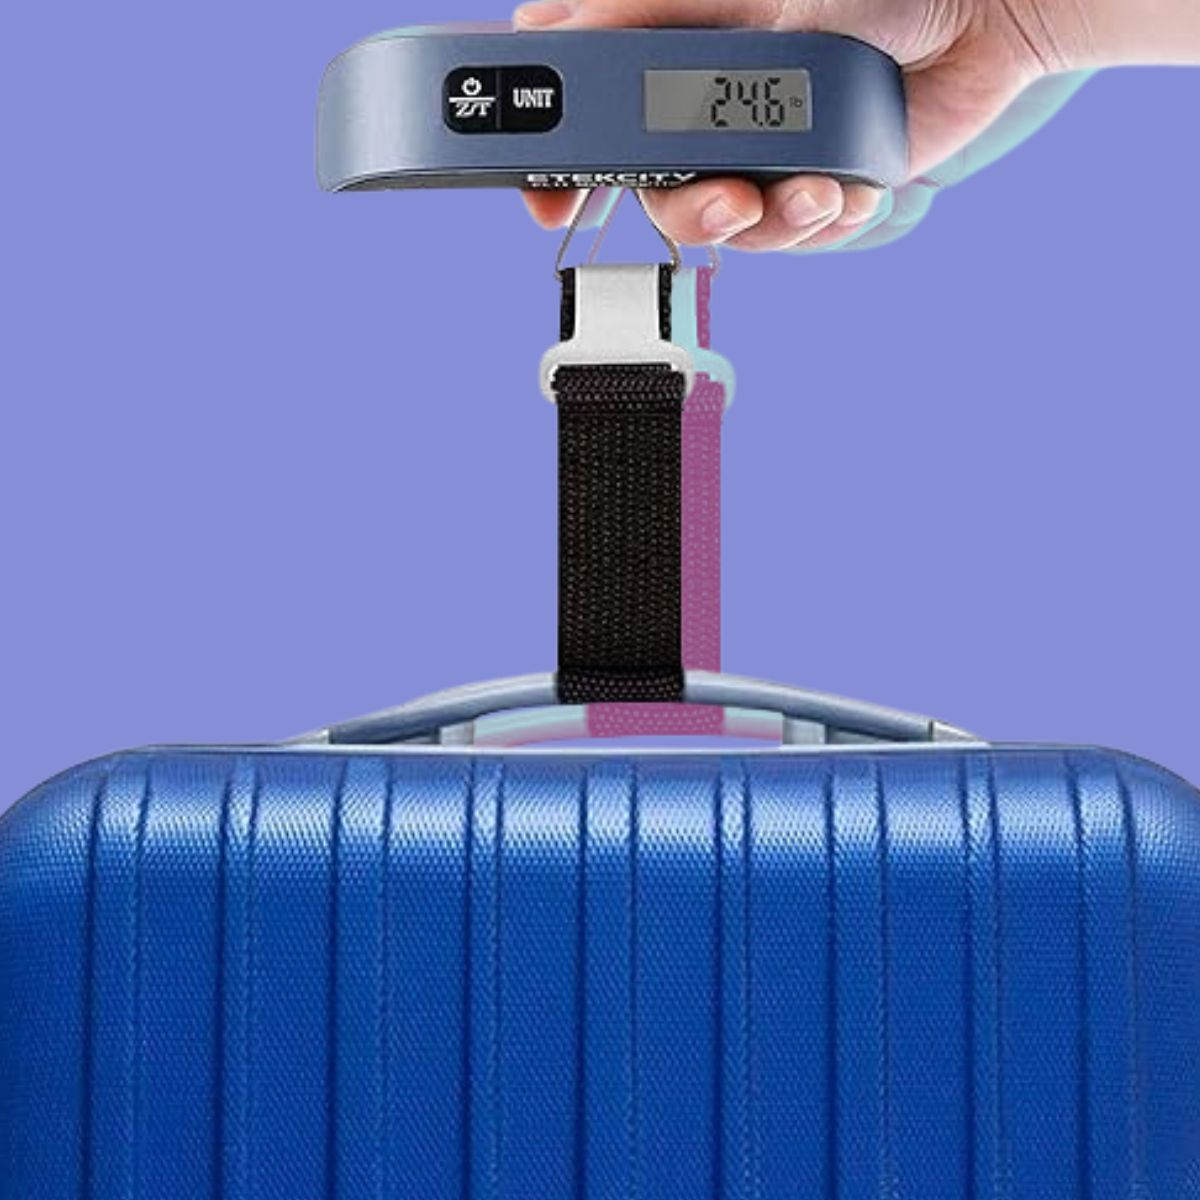 This $10 Handheld Luggage Scale Has 51,000+ 5-Star Reviews on